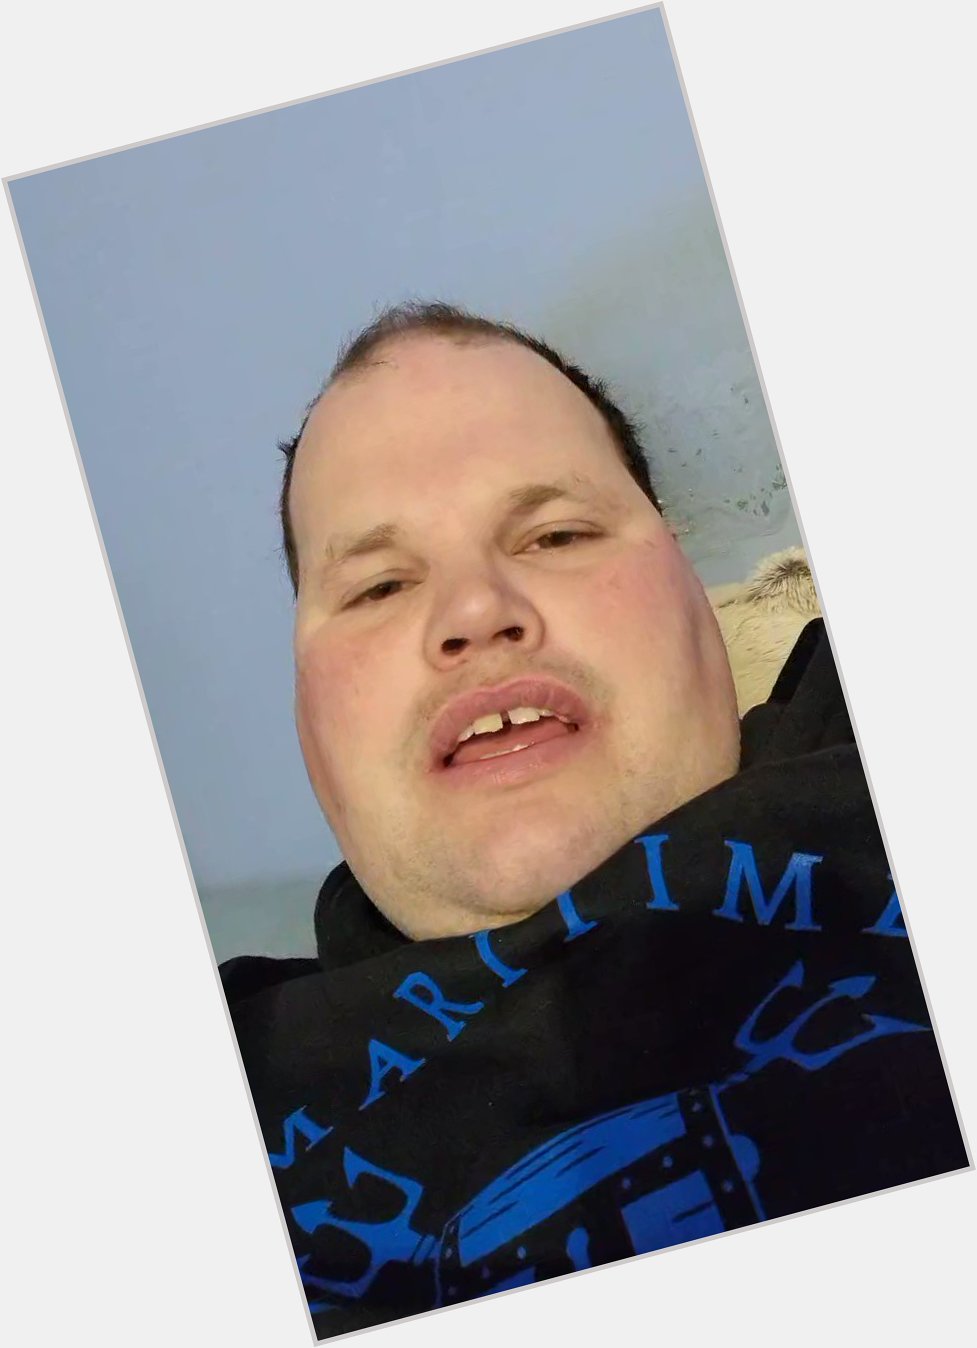 Happy Birthday Alice Cooper and have a great birthday from Frankie MacDonald 